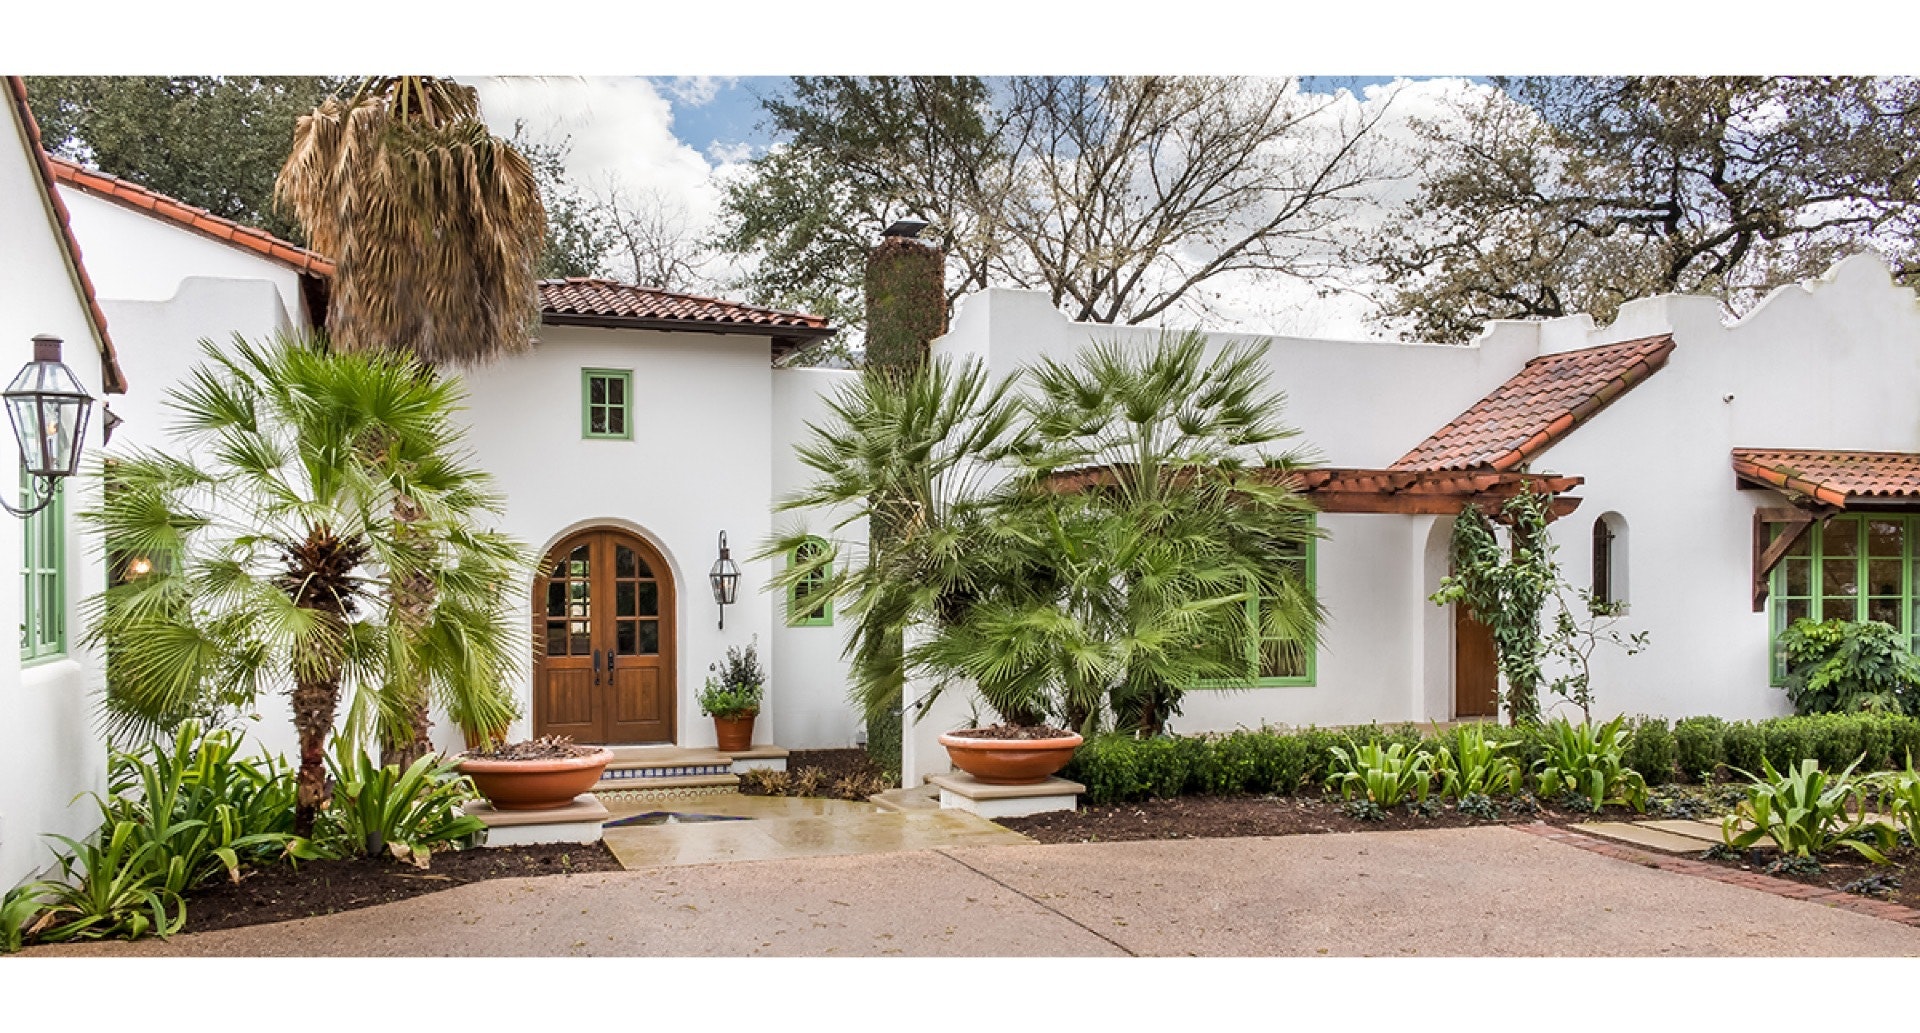 White stucco Spanish Colonial with red tile roof